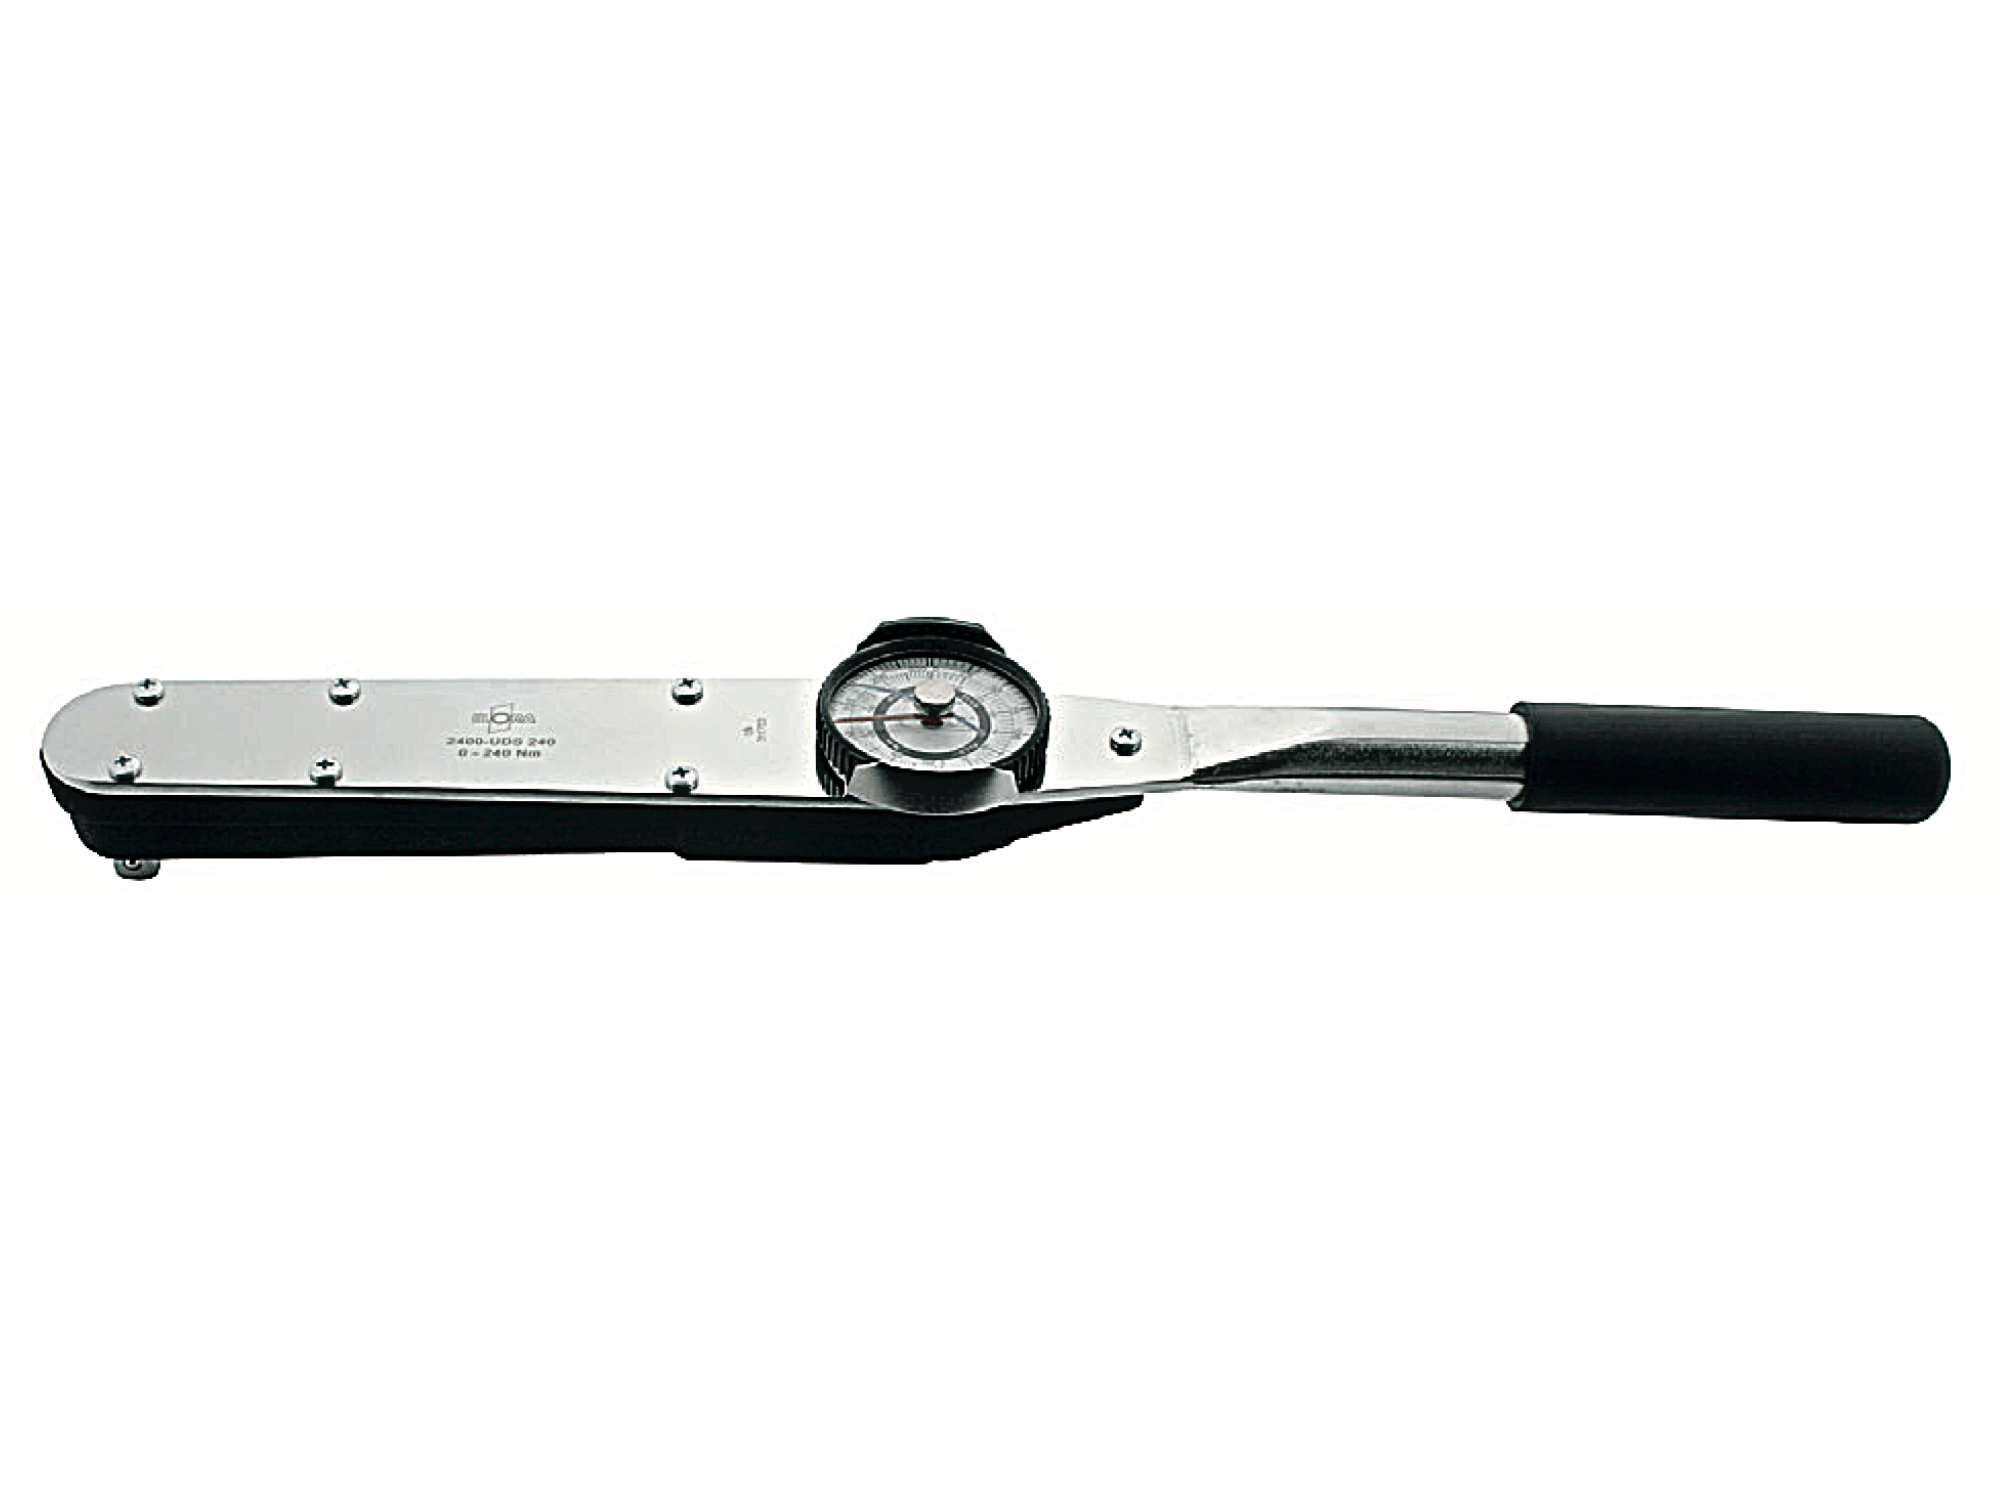 ELORA 2400-UDS18/30/70 Elometer 1/4" Torque Wrench With Drag (ELORA Tools) - Premium 1/4" Torque Wrench from ELORA - Shop now at Yew Aik.